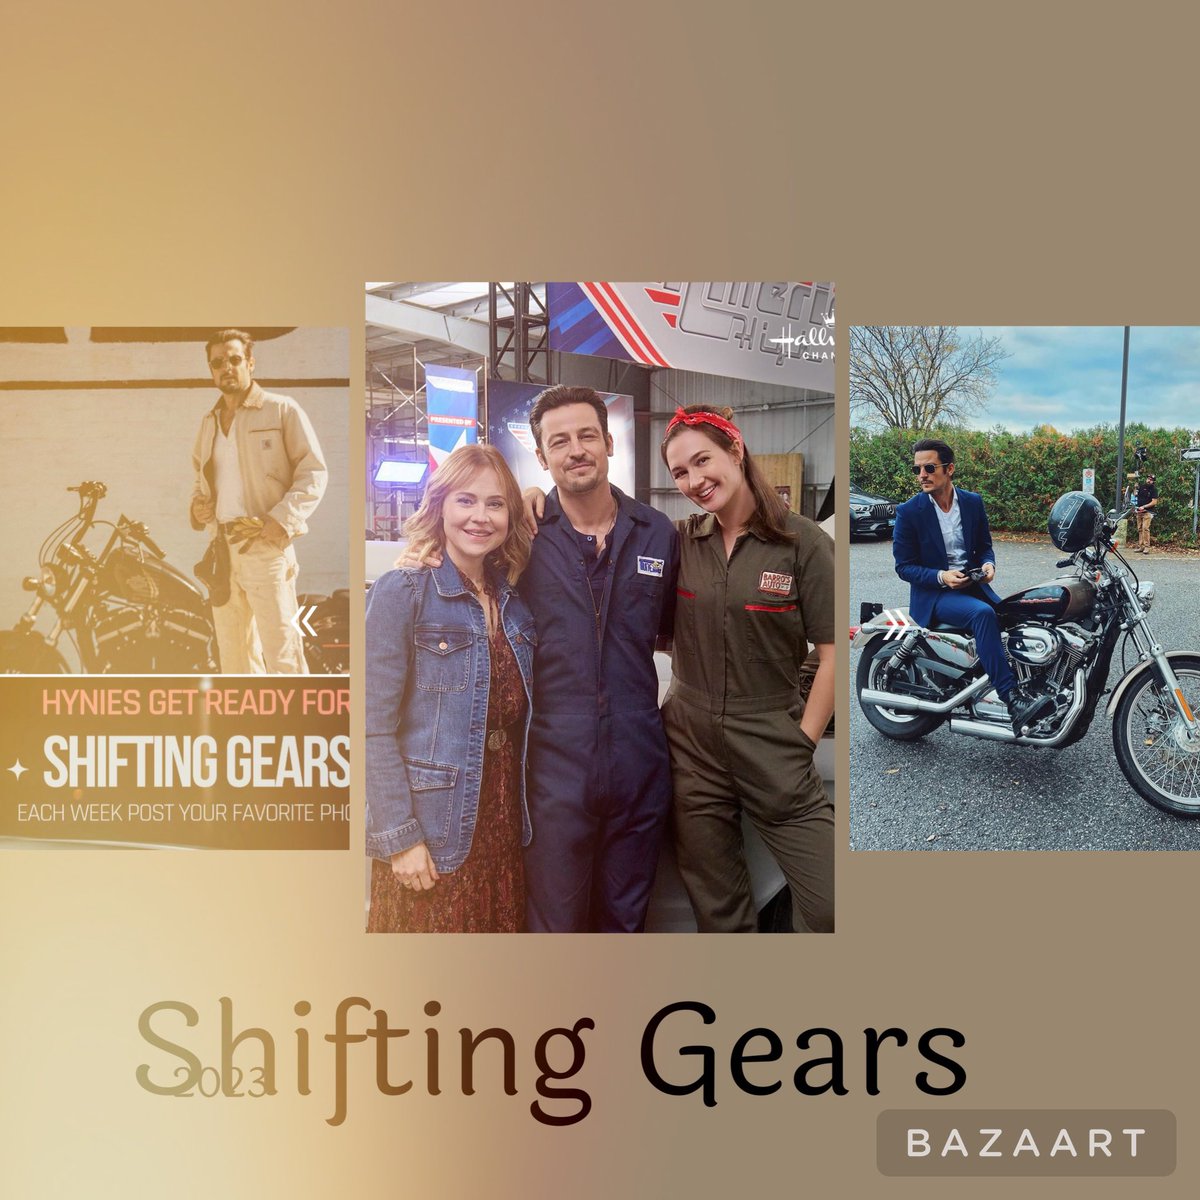 So excited for #ShiftingGears  on Saturday, March 23 on @hallmarkchannel 
@tyler_hynes @KatBarrell @RealCrystalLowe @kristintbooth #AshleyWilliams #POstables